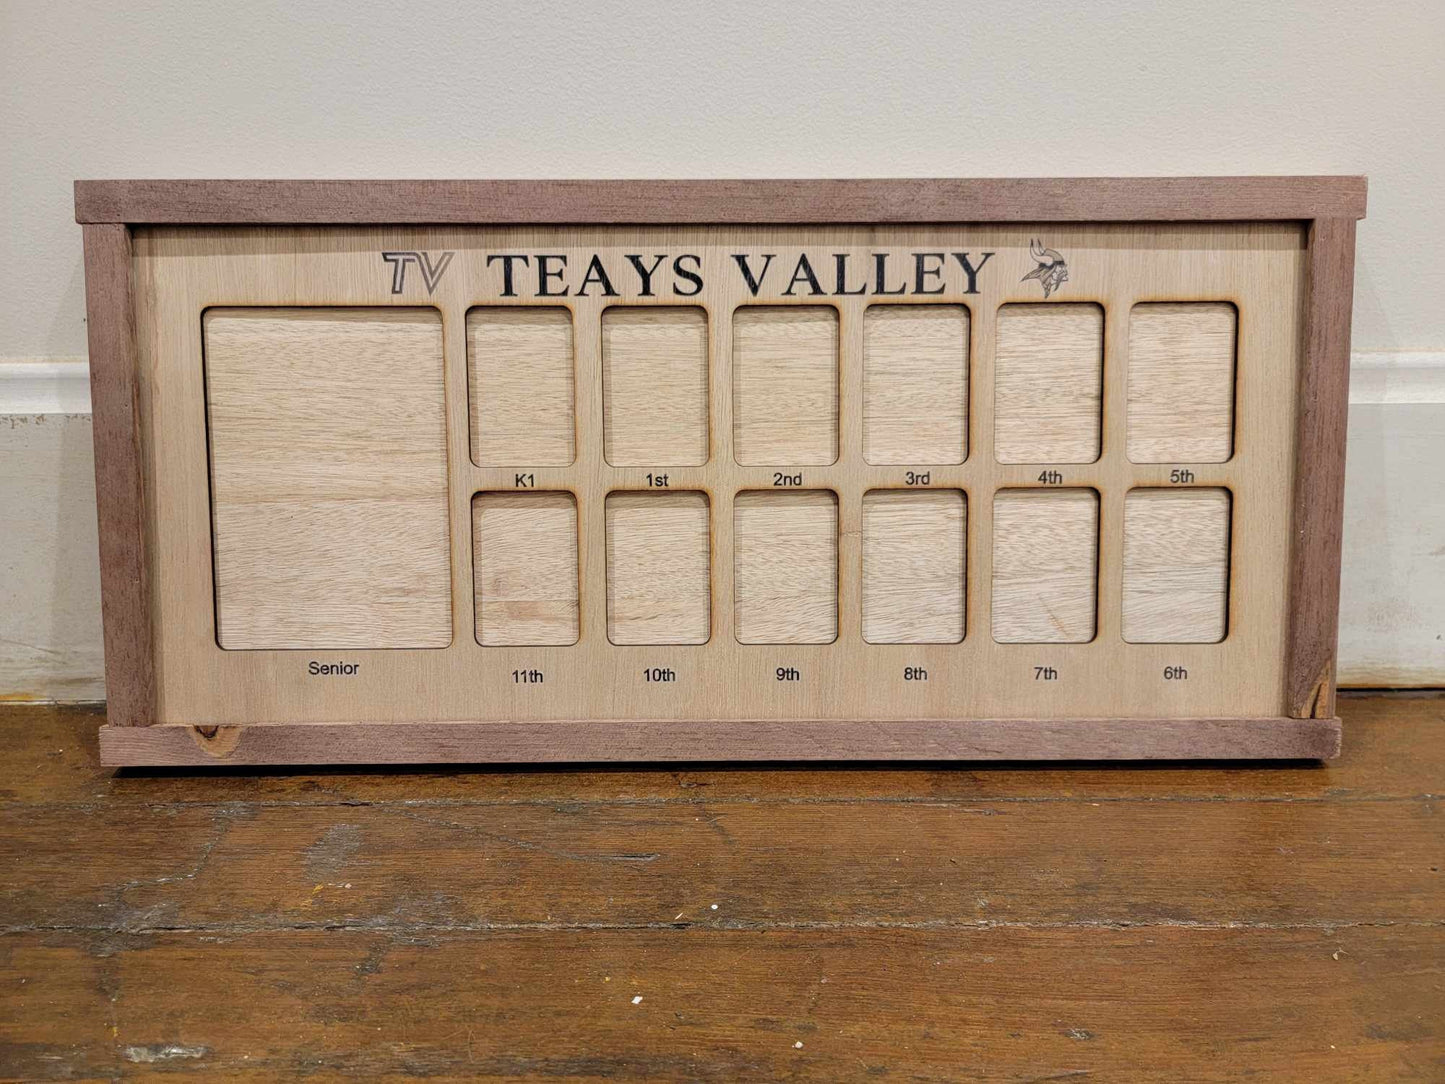 Vikings Teays Valley Ohio School Name Local School District Personalized K-12 Years Horizontal Picture Frame Photo Display Back to School